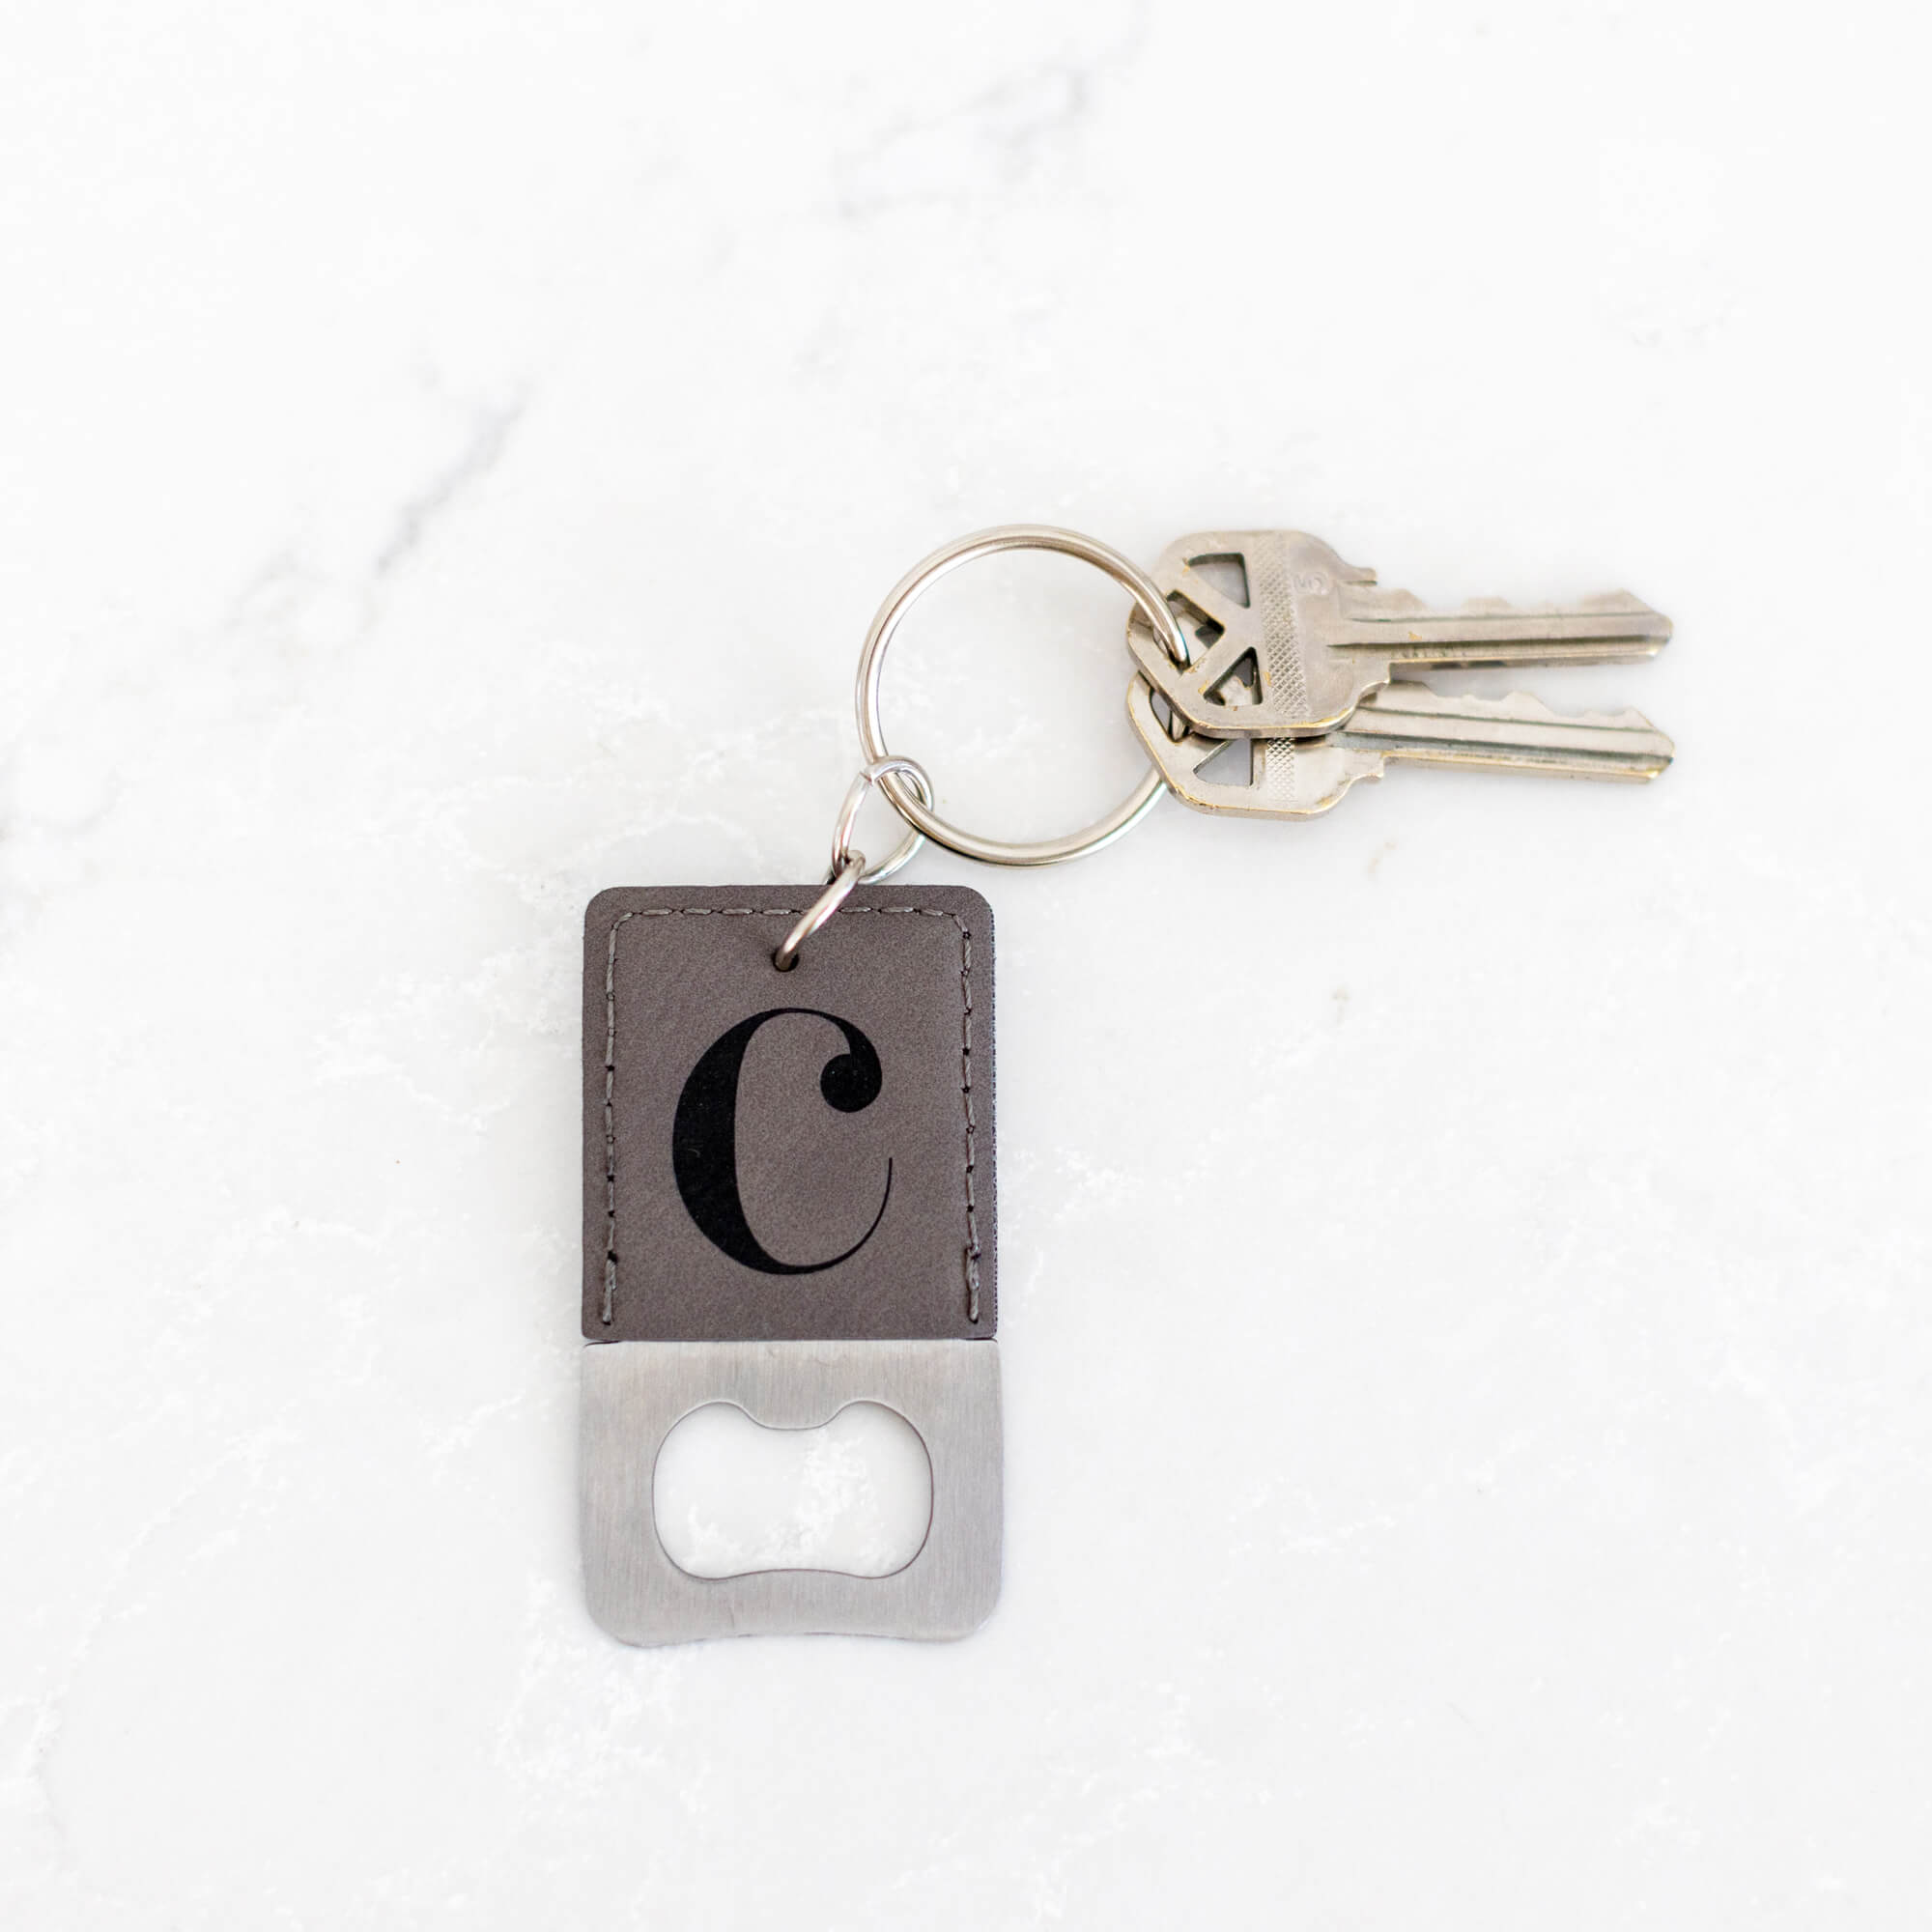 Vegan Leather Bottle Opener Keychain with Initial